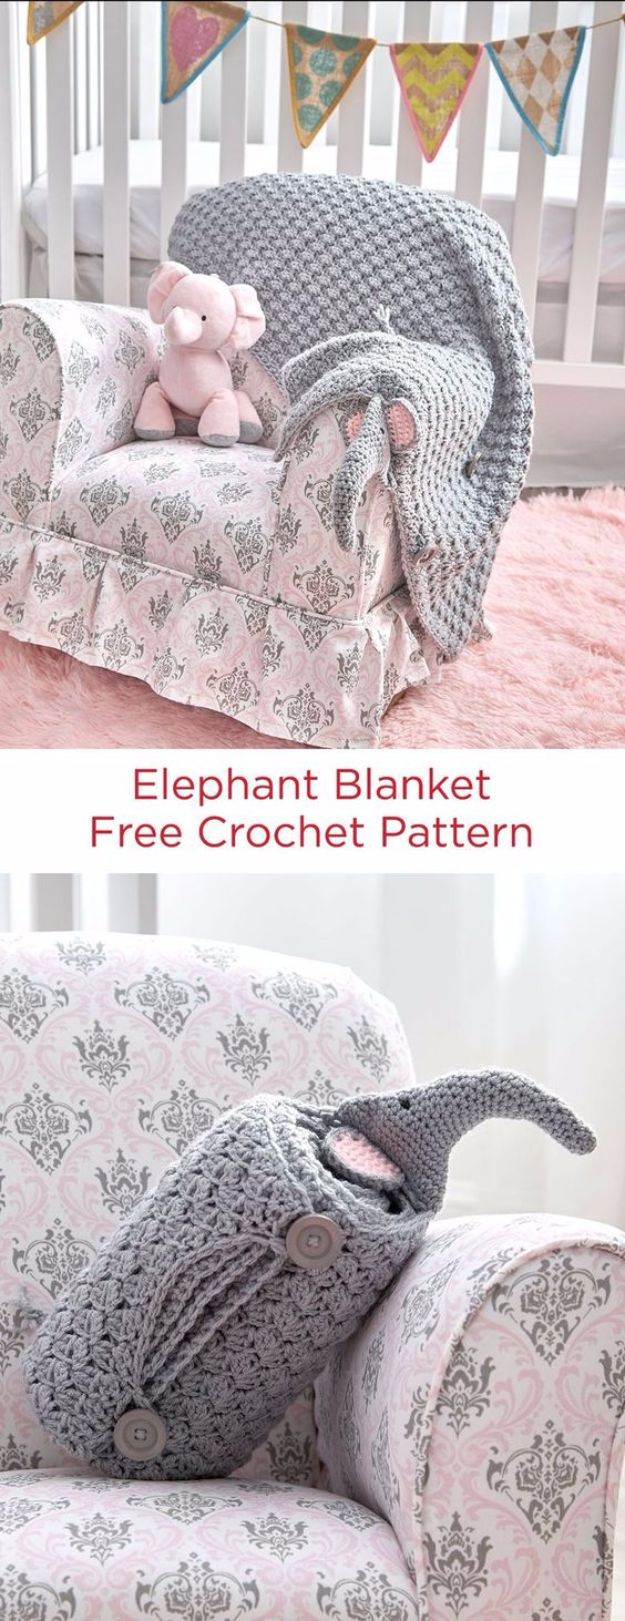 DIY Ideas With Elephants - Elephant Blanket - Easy Wall Art Ideas, Crafts, Jewelry, Arts and Craft Projects for Kids, Teens and Adults- Simple Canvases, Throw Pillows, Cute Paintings for Nurseries, Dollar Store Crafts and Fun Dorm Room and Bedroom Decor - Tutorials for Crafty Ideas Decorated With an Elephant